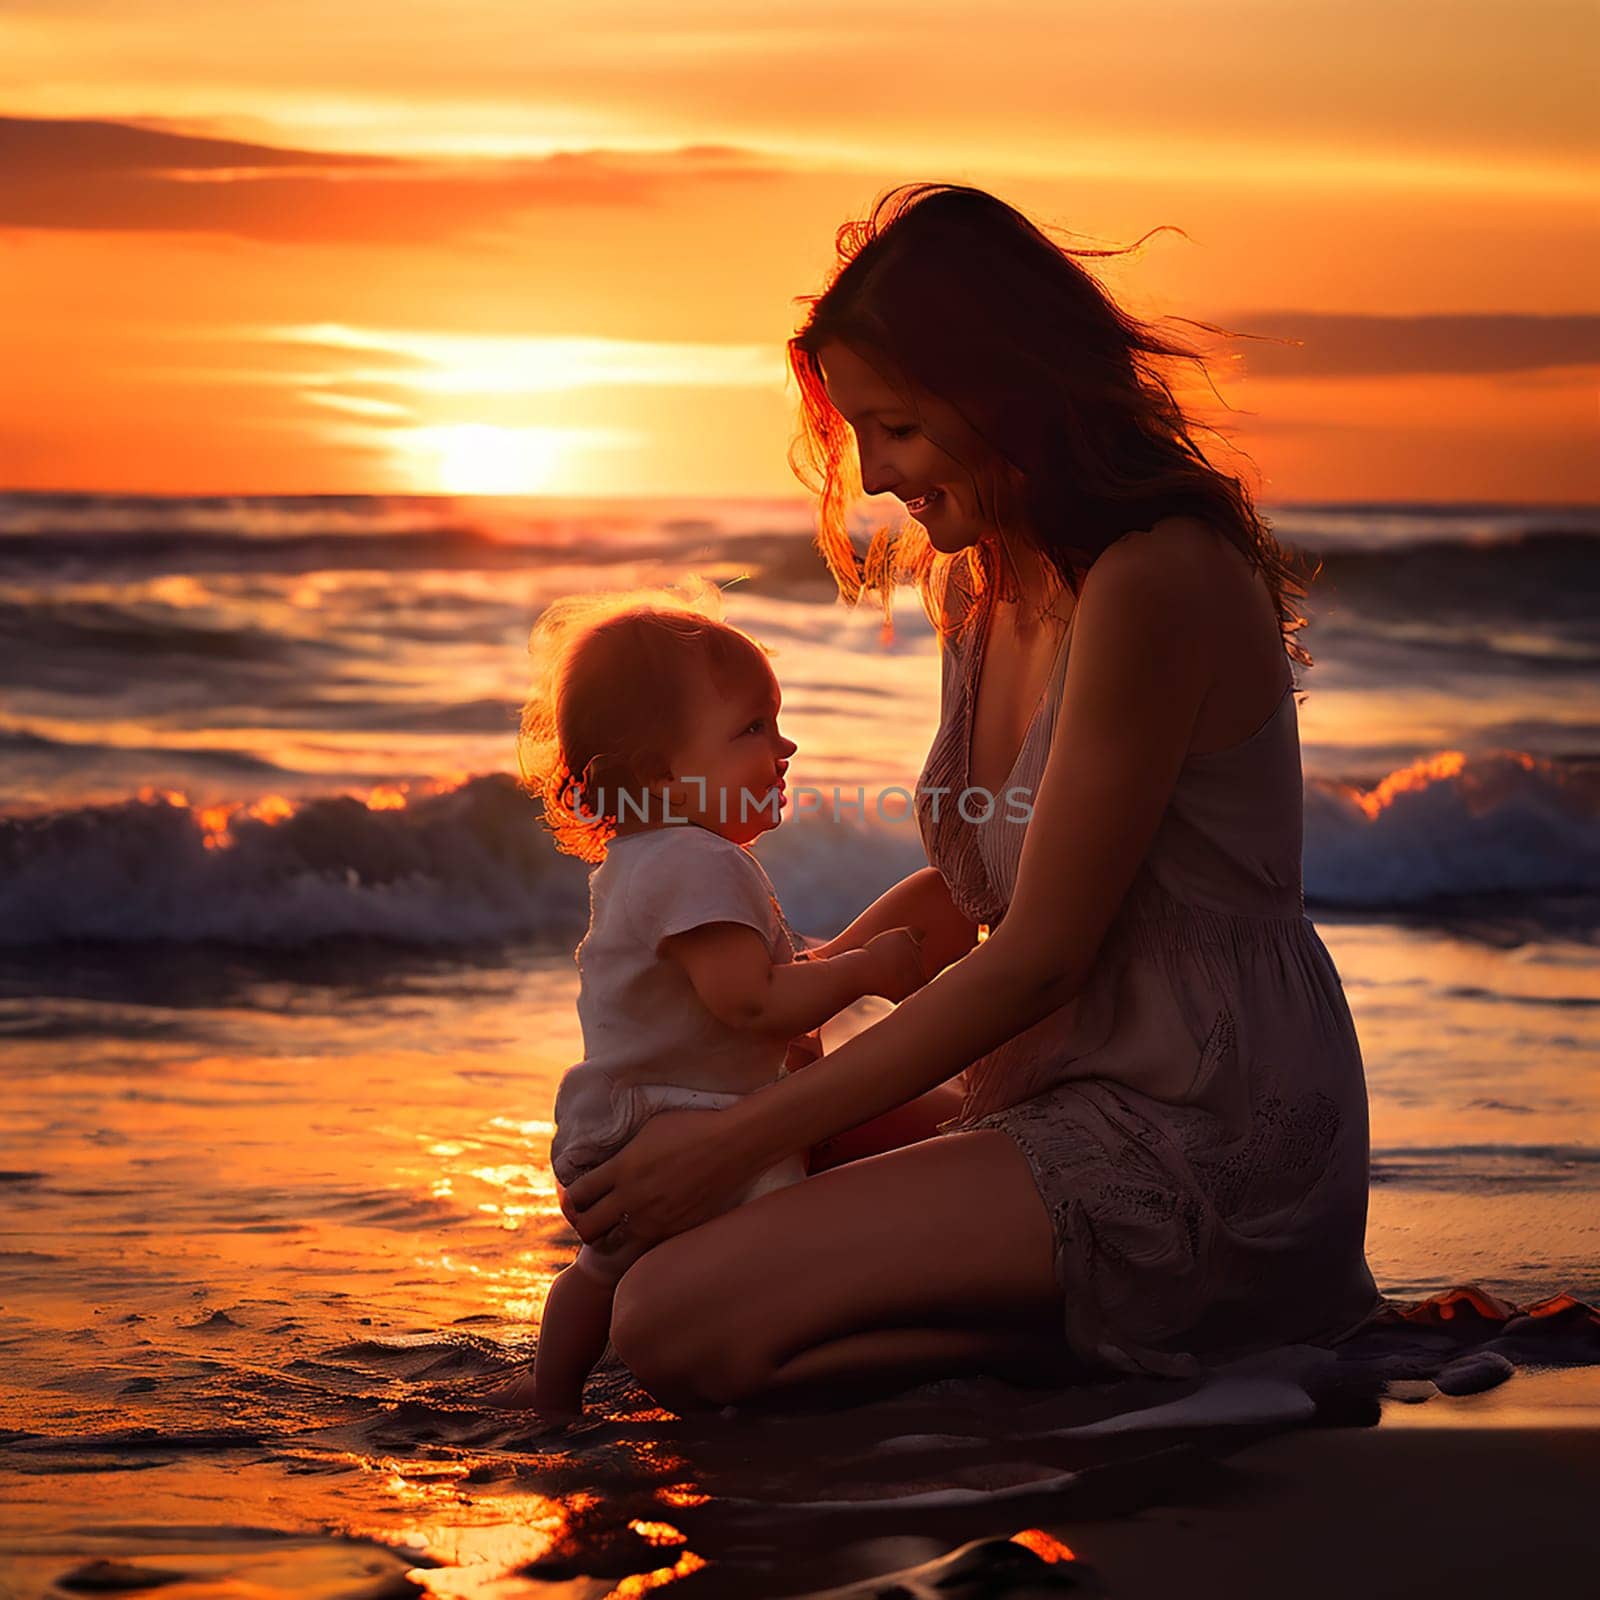 Woman at the Beach with Her Baby, Immersed in the Beauty of a Sunset by Petrichor